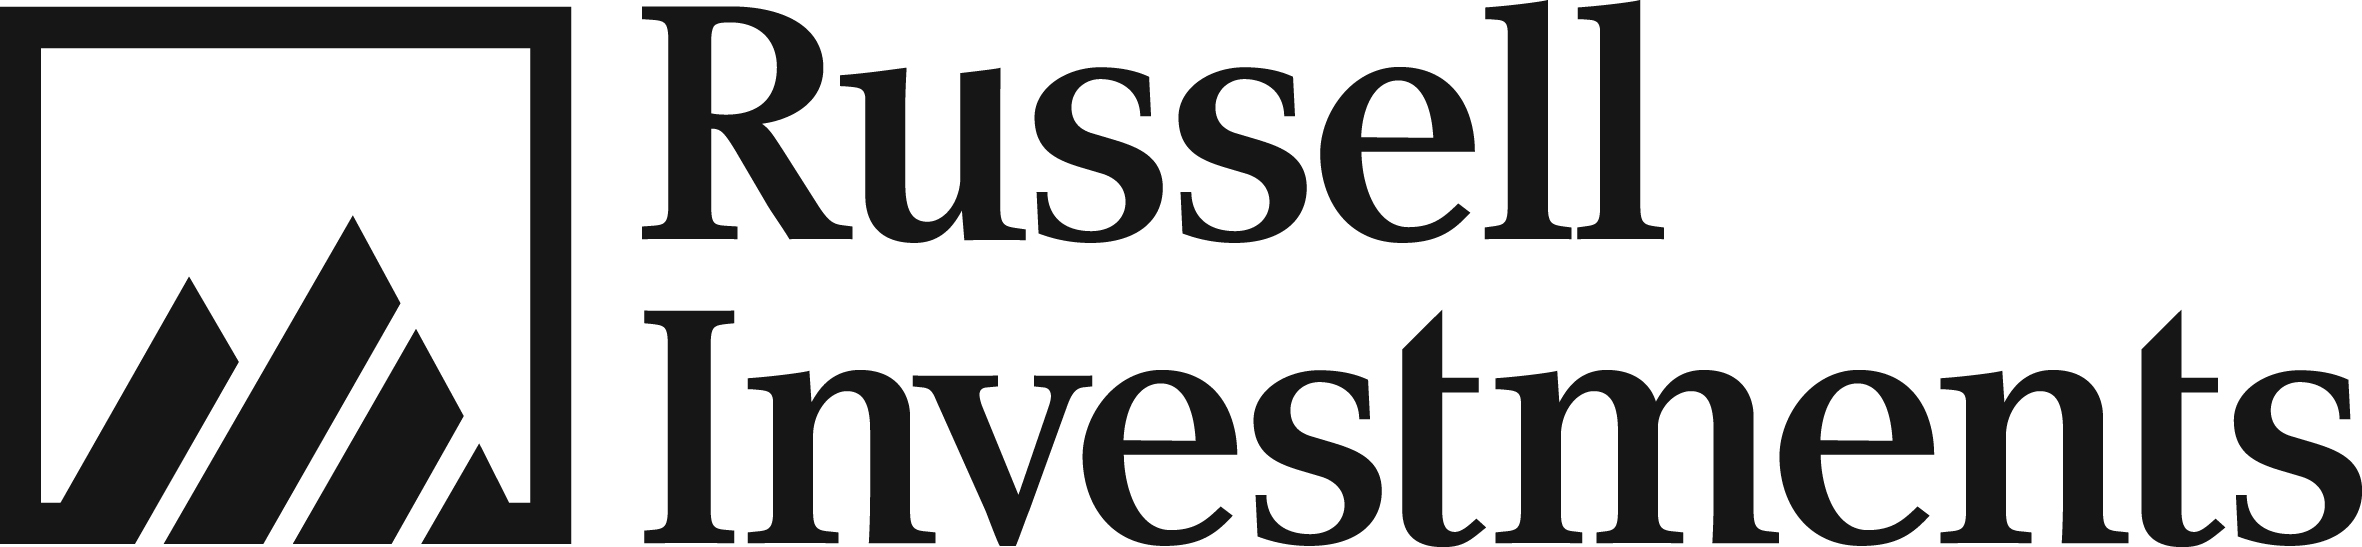 Russell Investments Logo_Blk.jpg